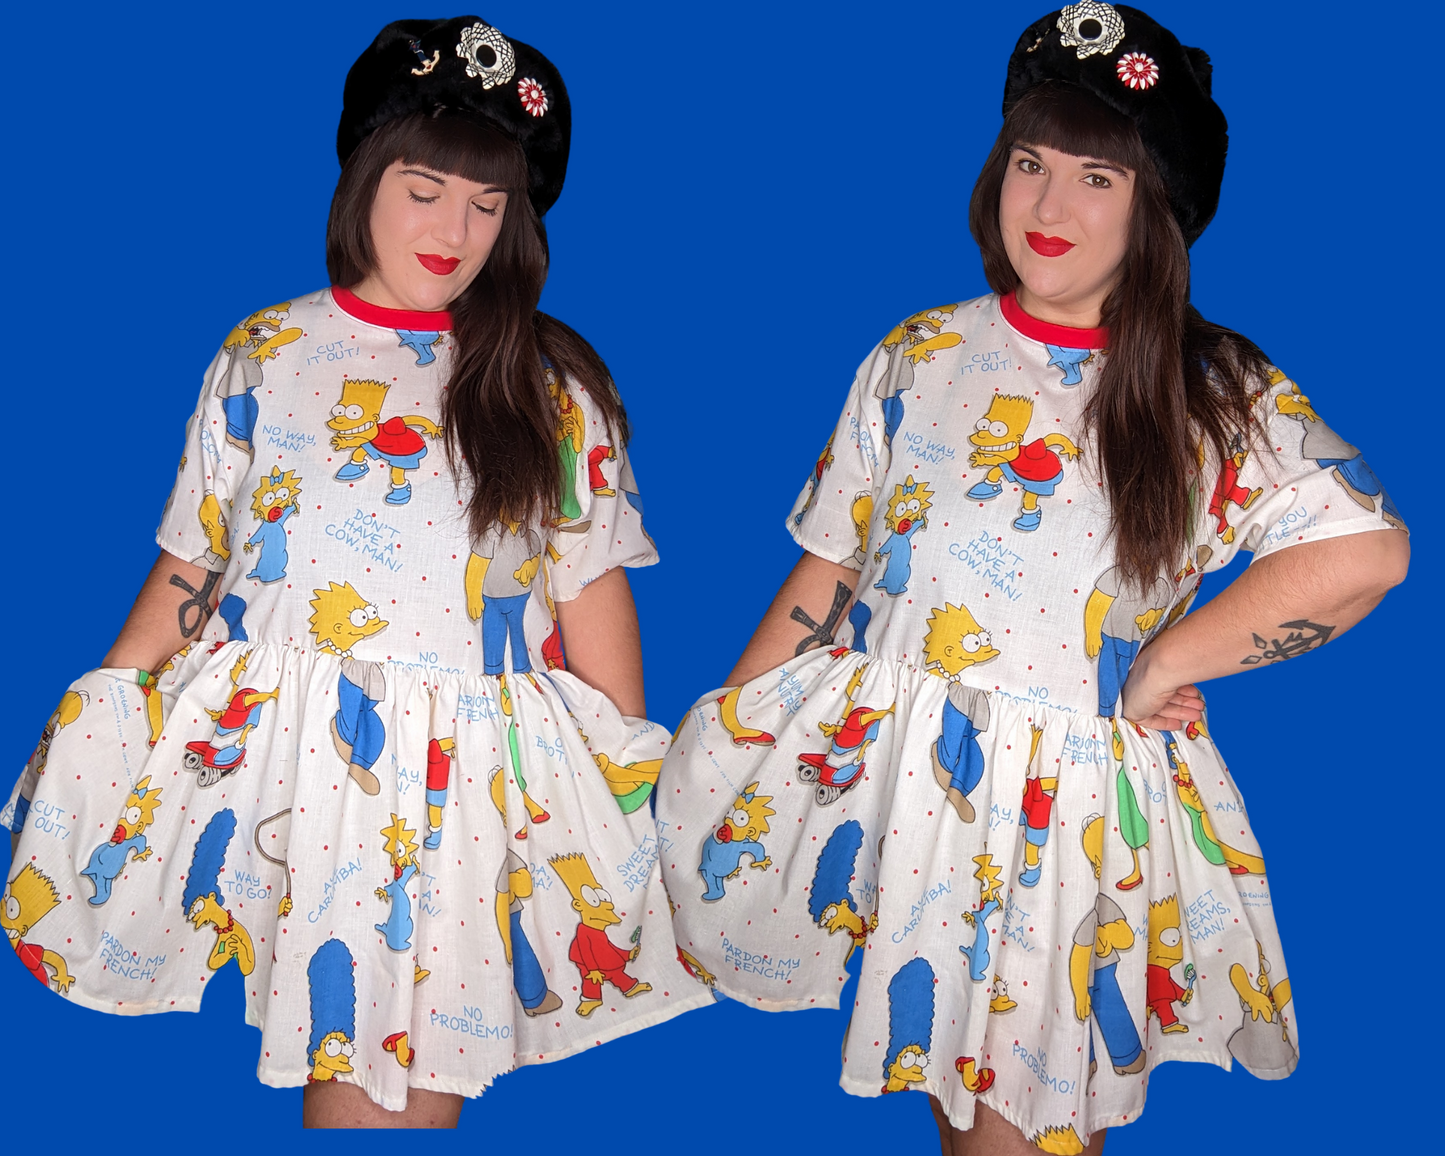 Handmade, Upcycled The Simpsons Bedsheet T-Shirt Dress Fits S-M-L-XL